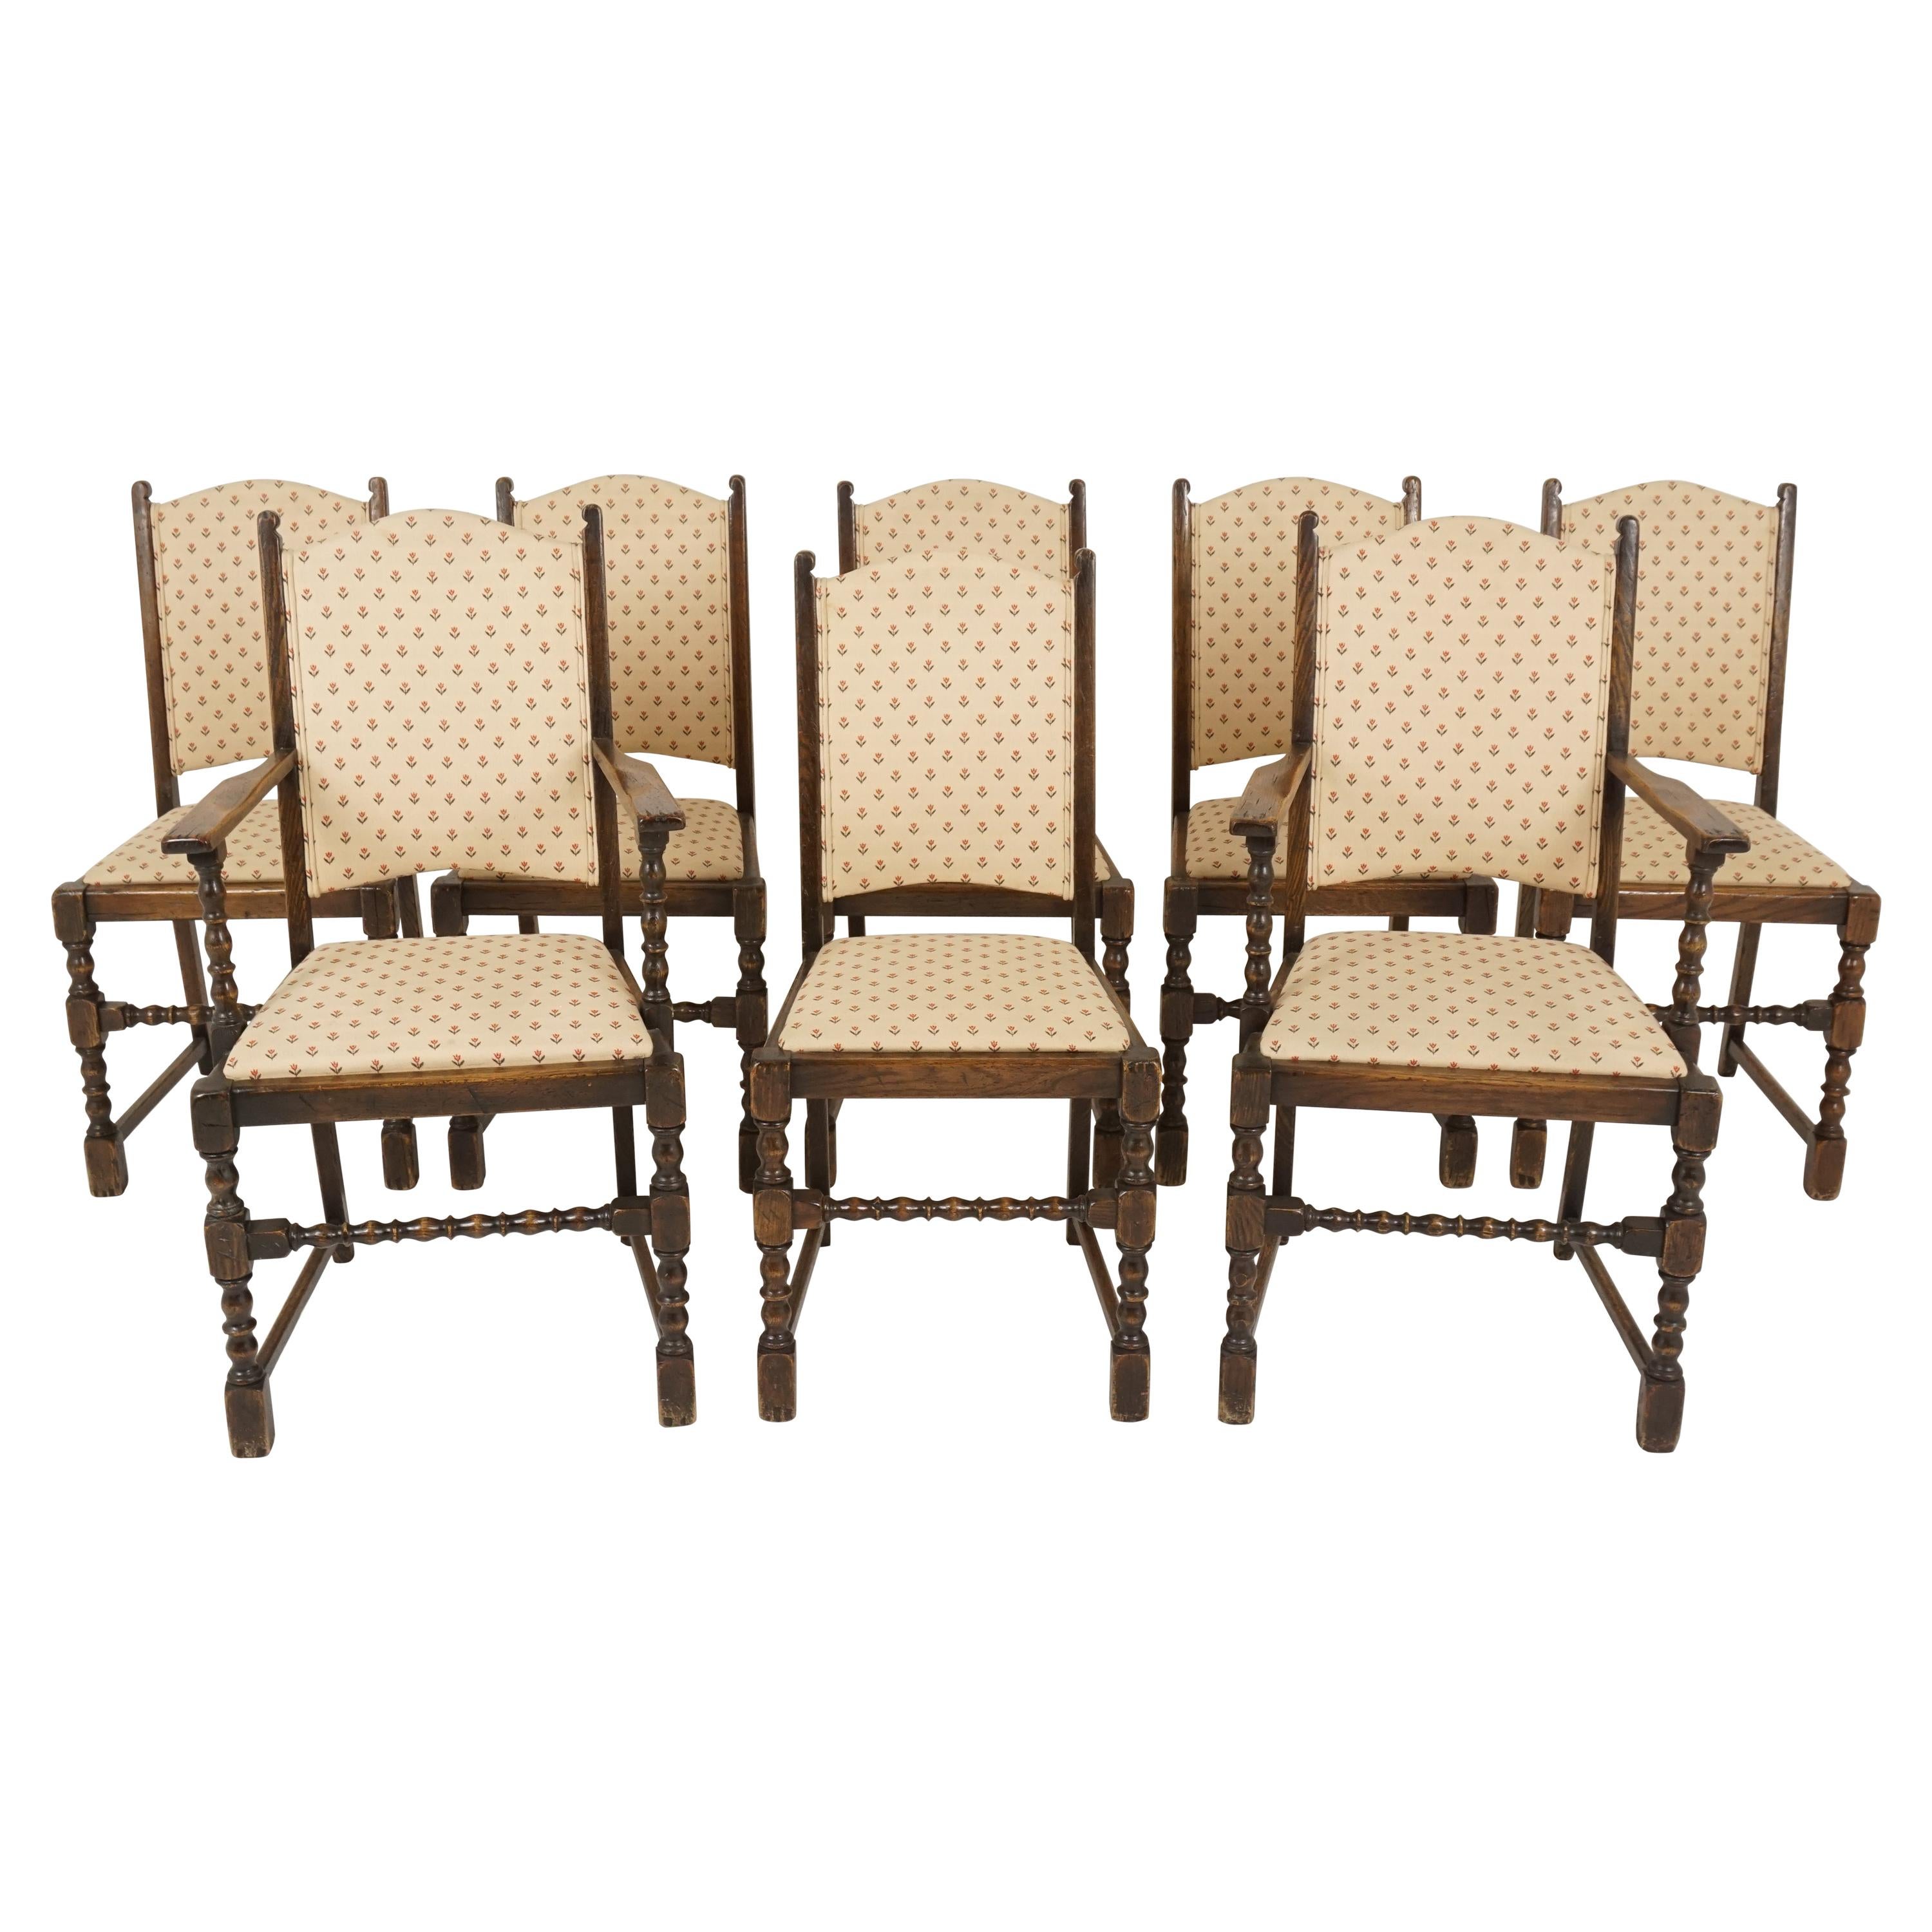 Set of 8 Oak Dining Chairs by Jaycee Brighton Sussex England, 1960, B2322